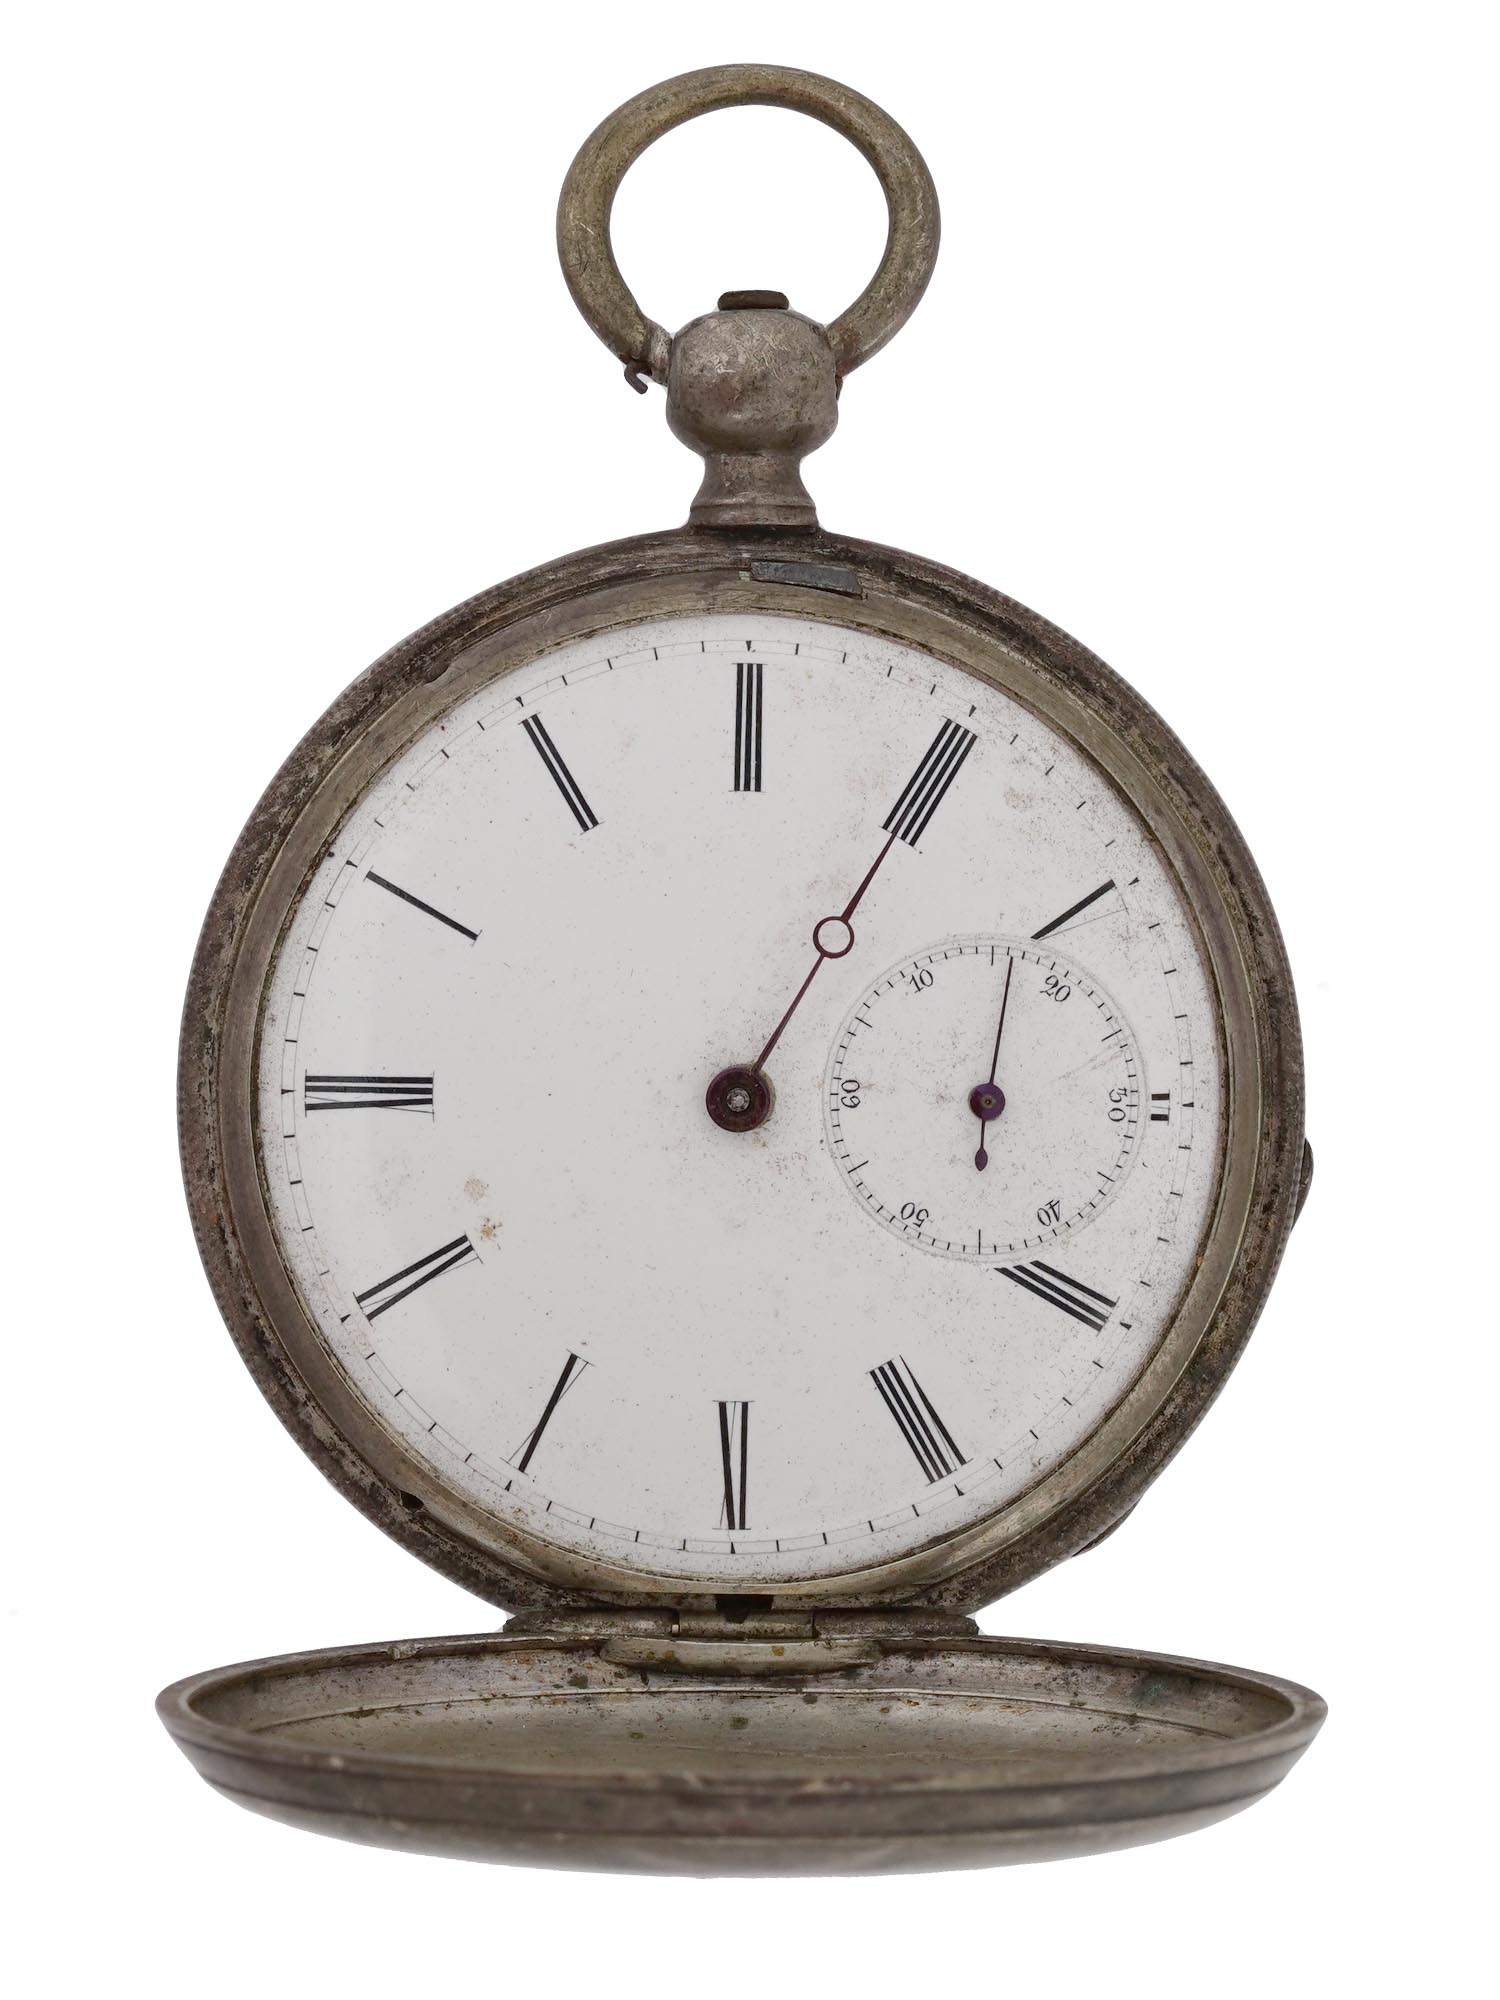 STERLING SILVER SWISS POCKET WATCH EARLY 20TH C PIC-0